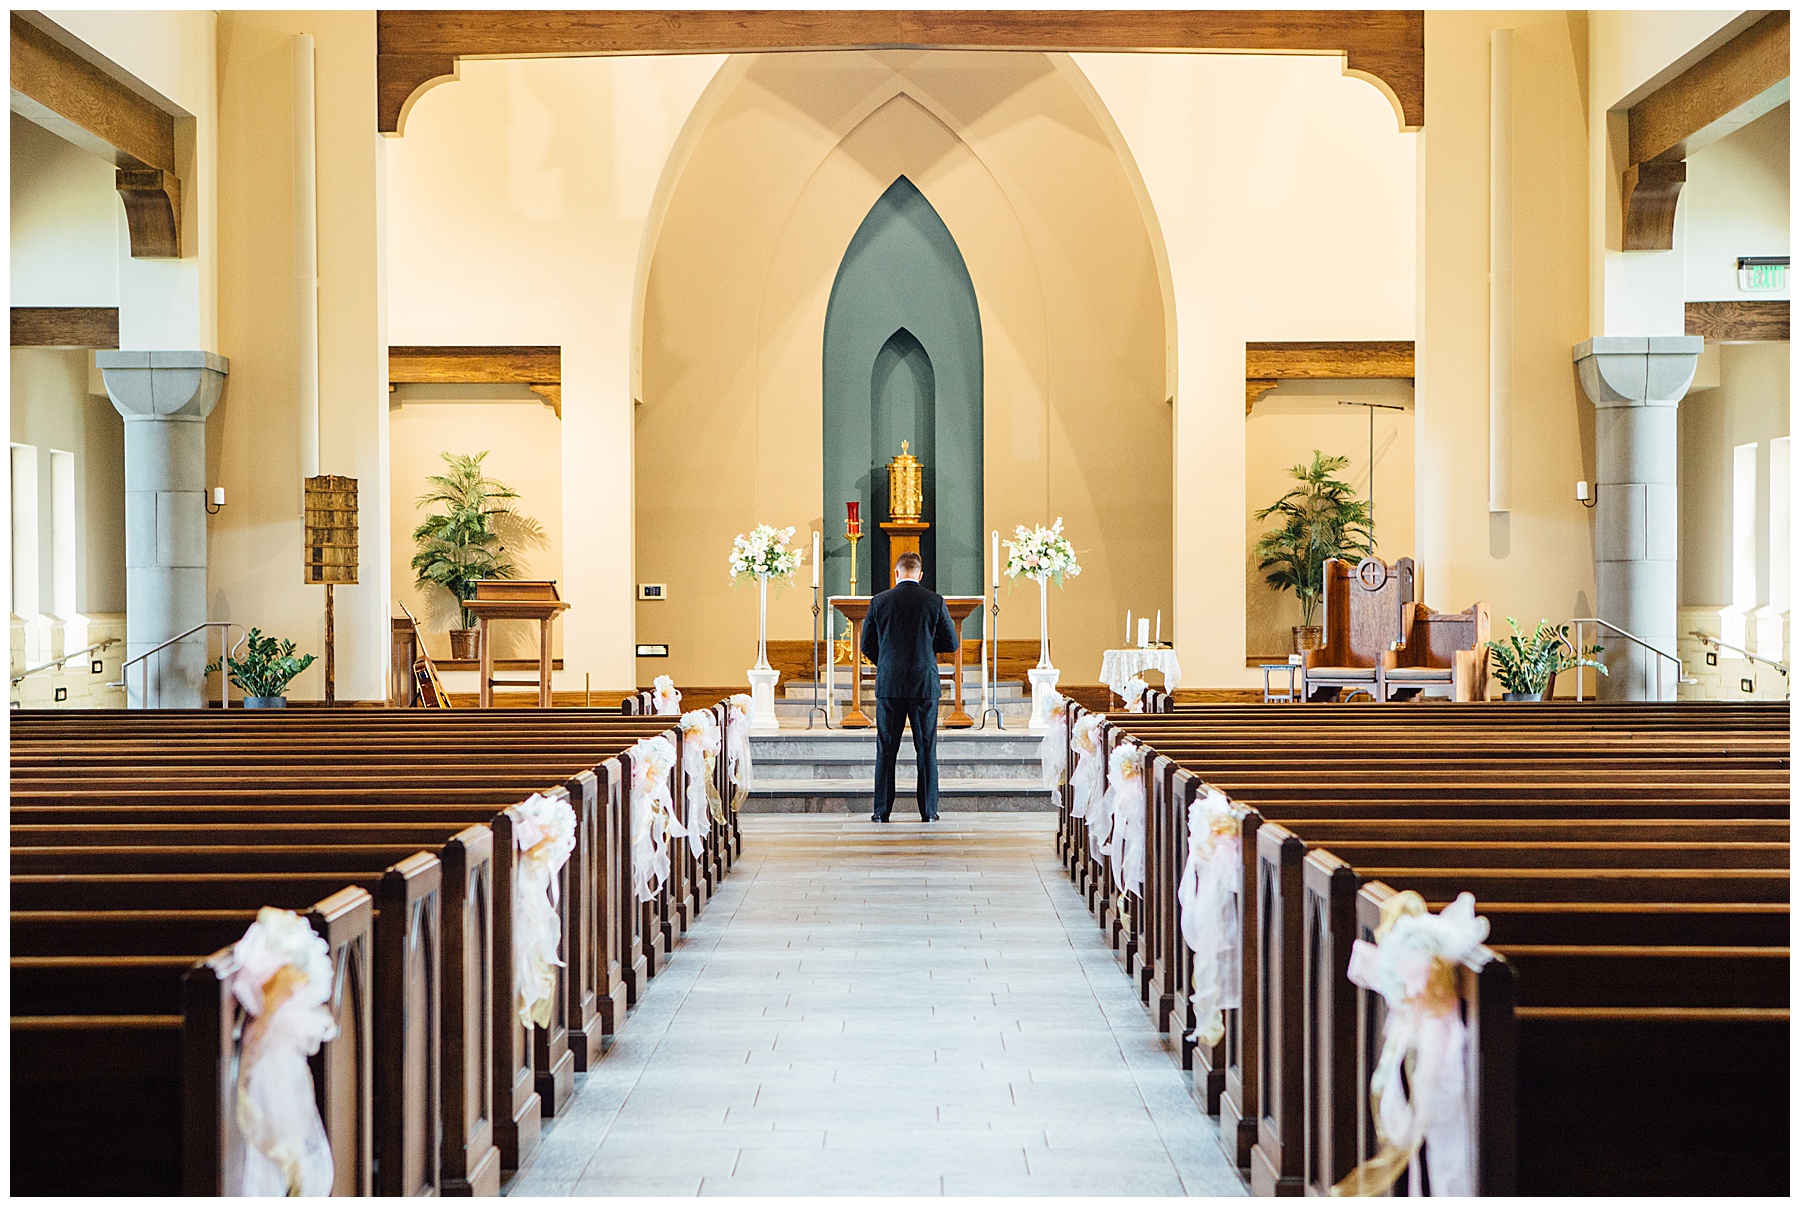 Groom standing alone in church